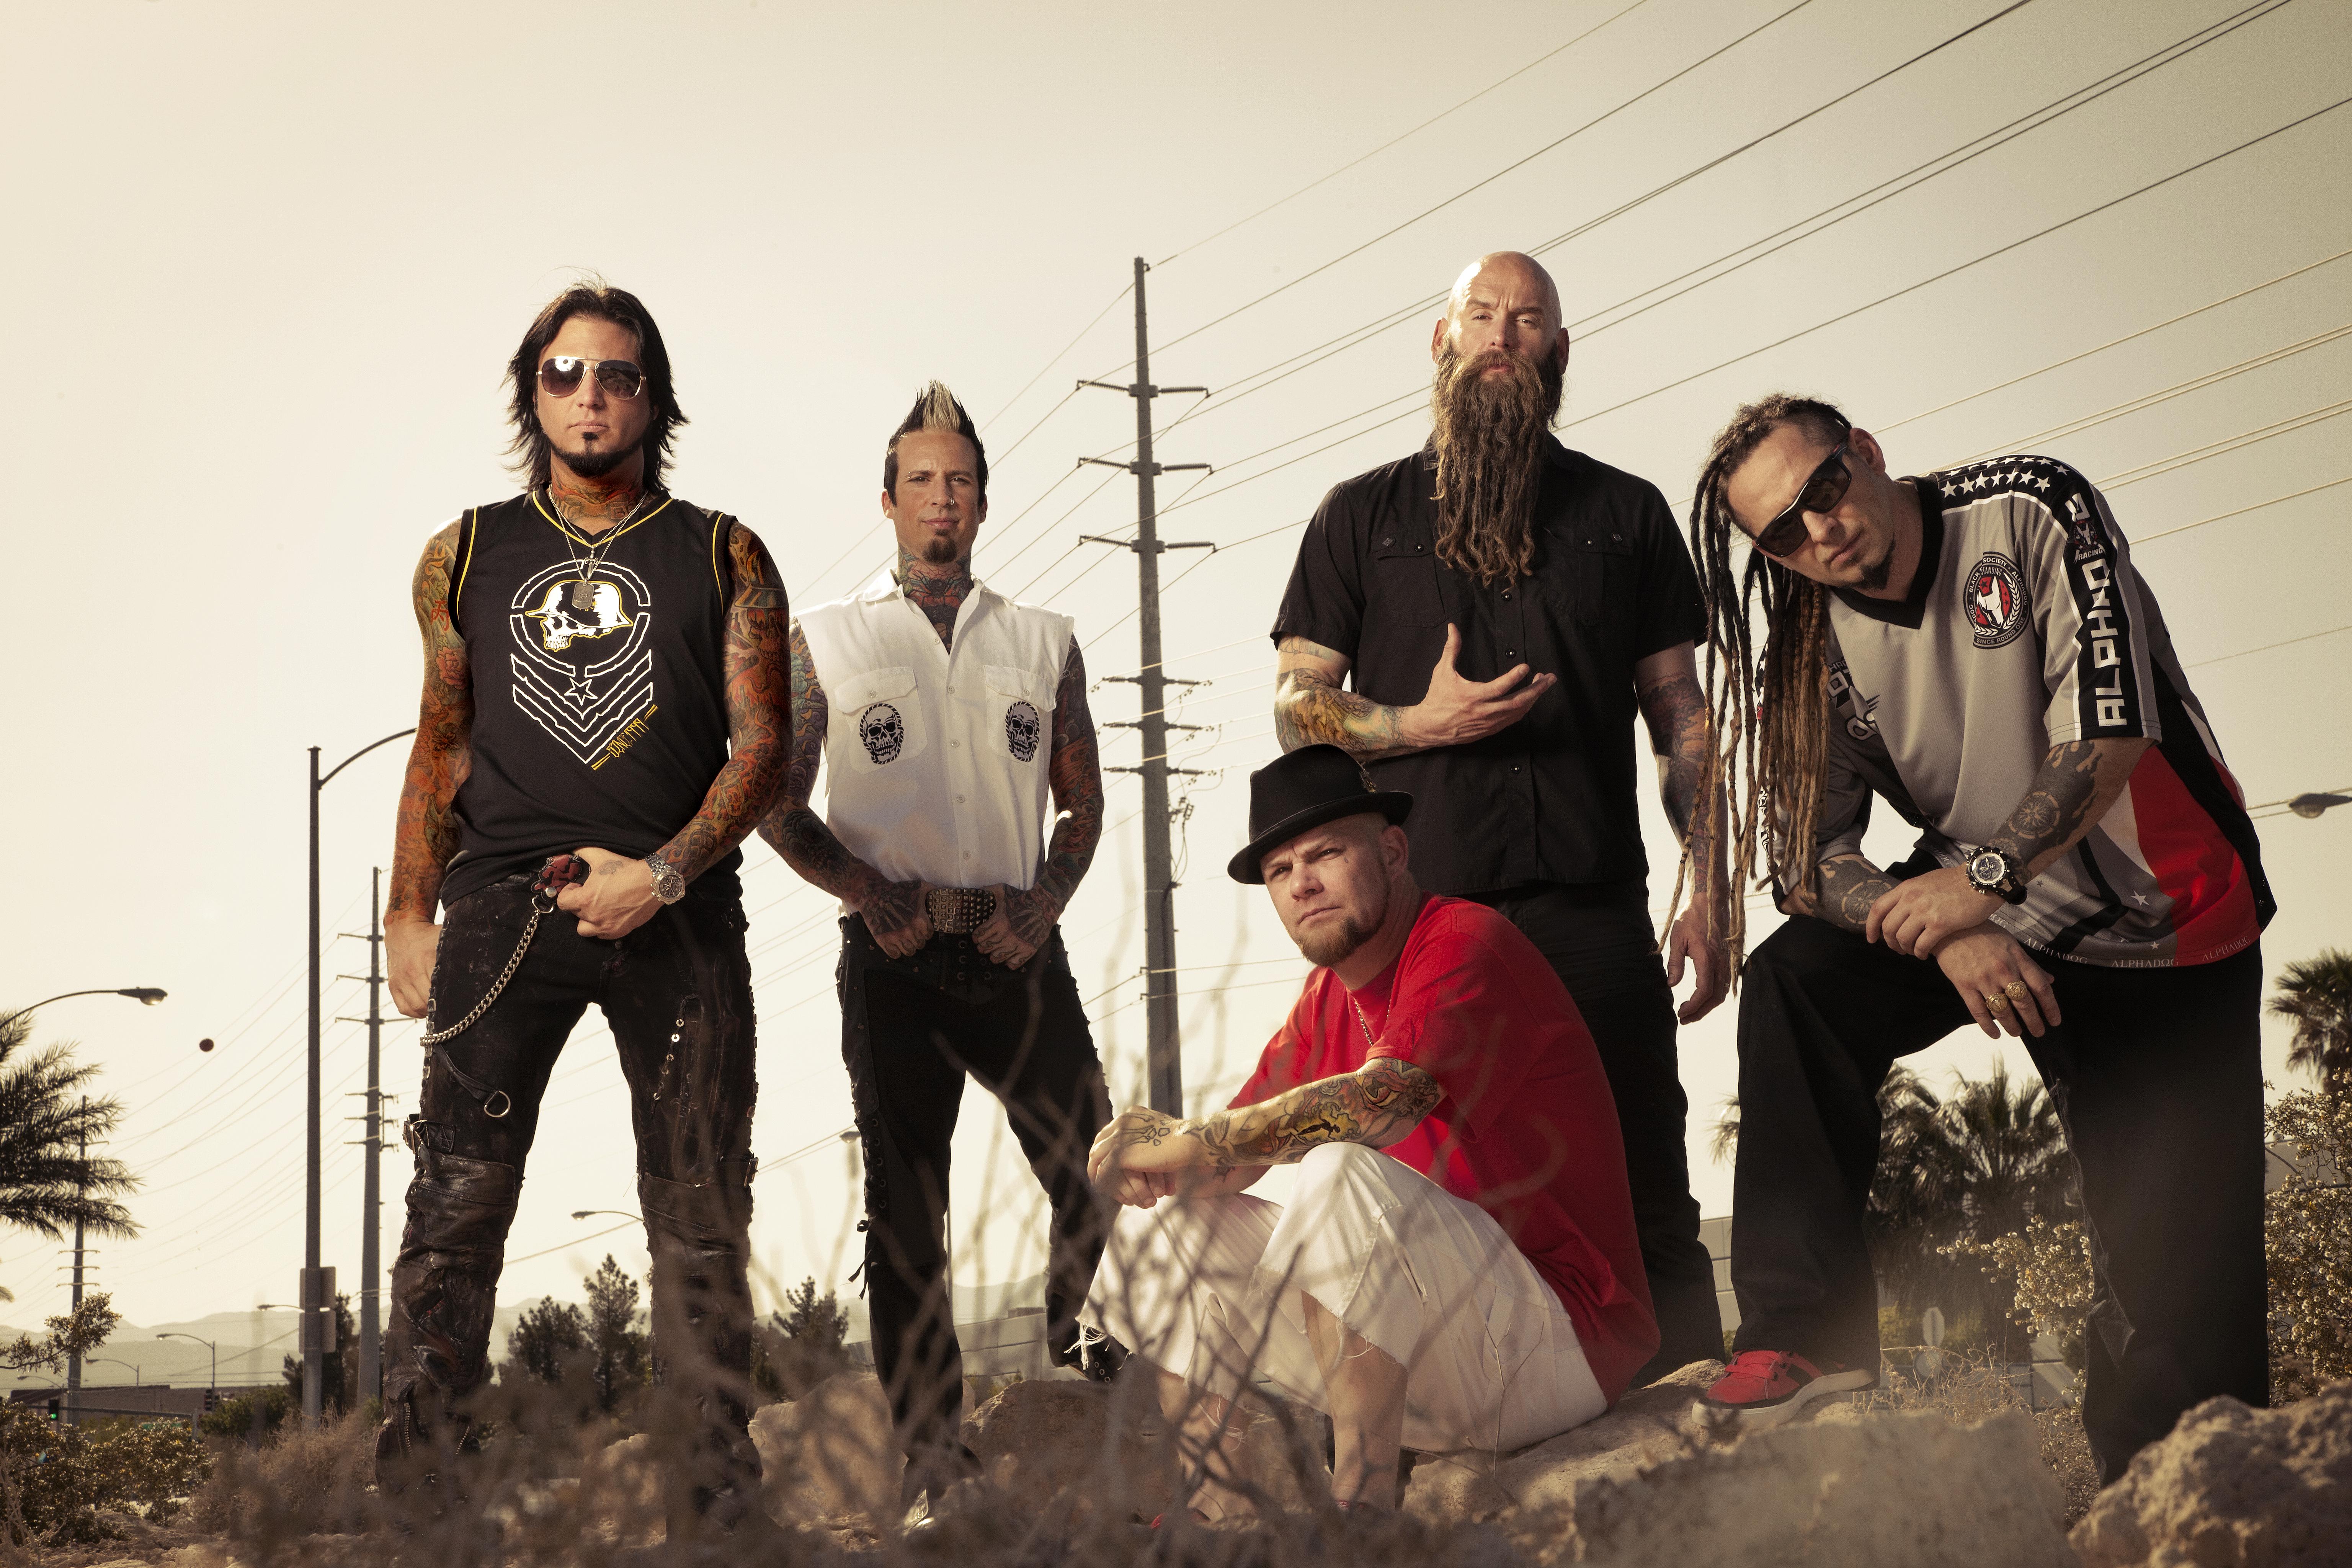 Five Finger Death Punch arrive at the O2 Academy on March 28th.